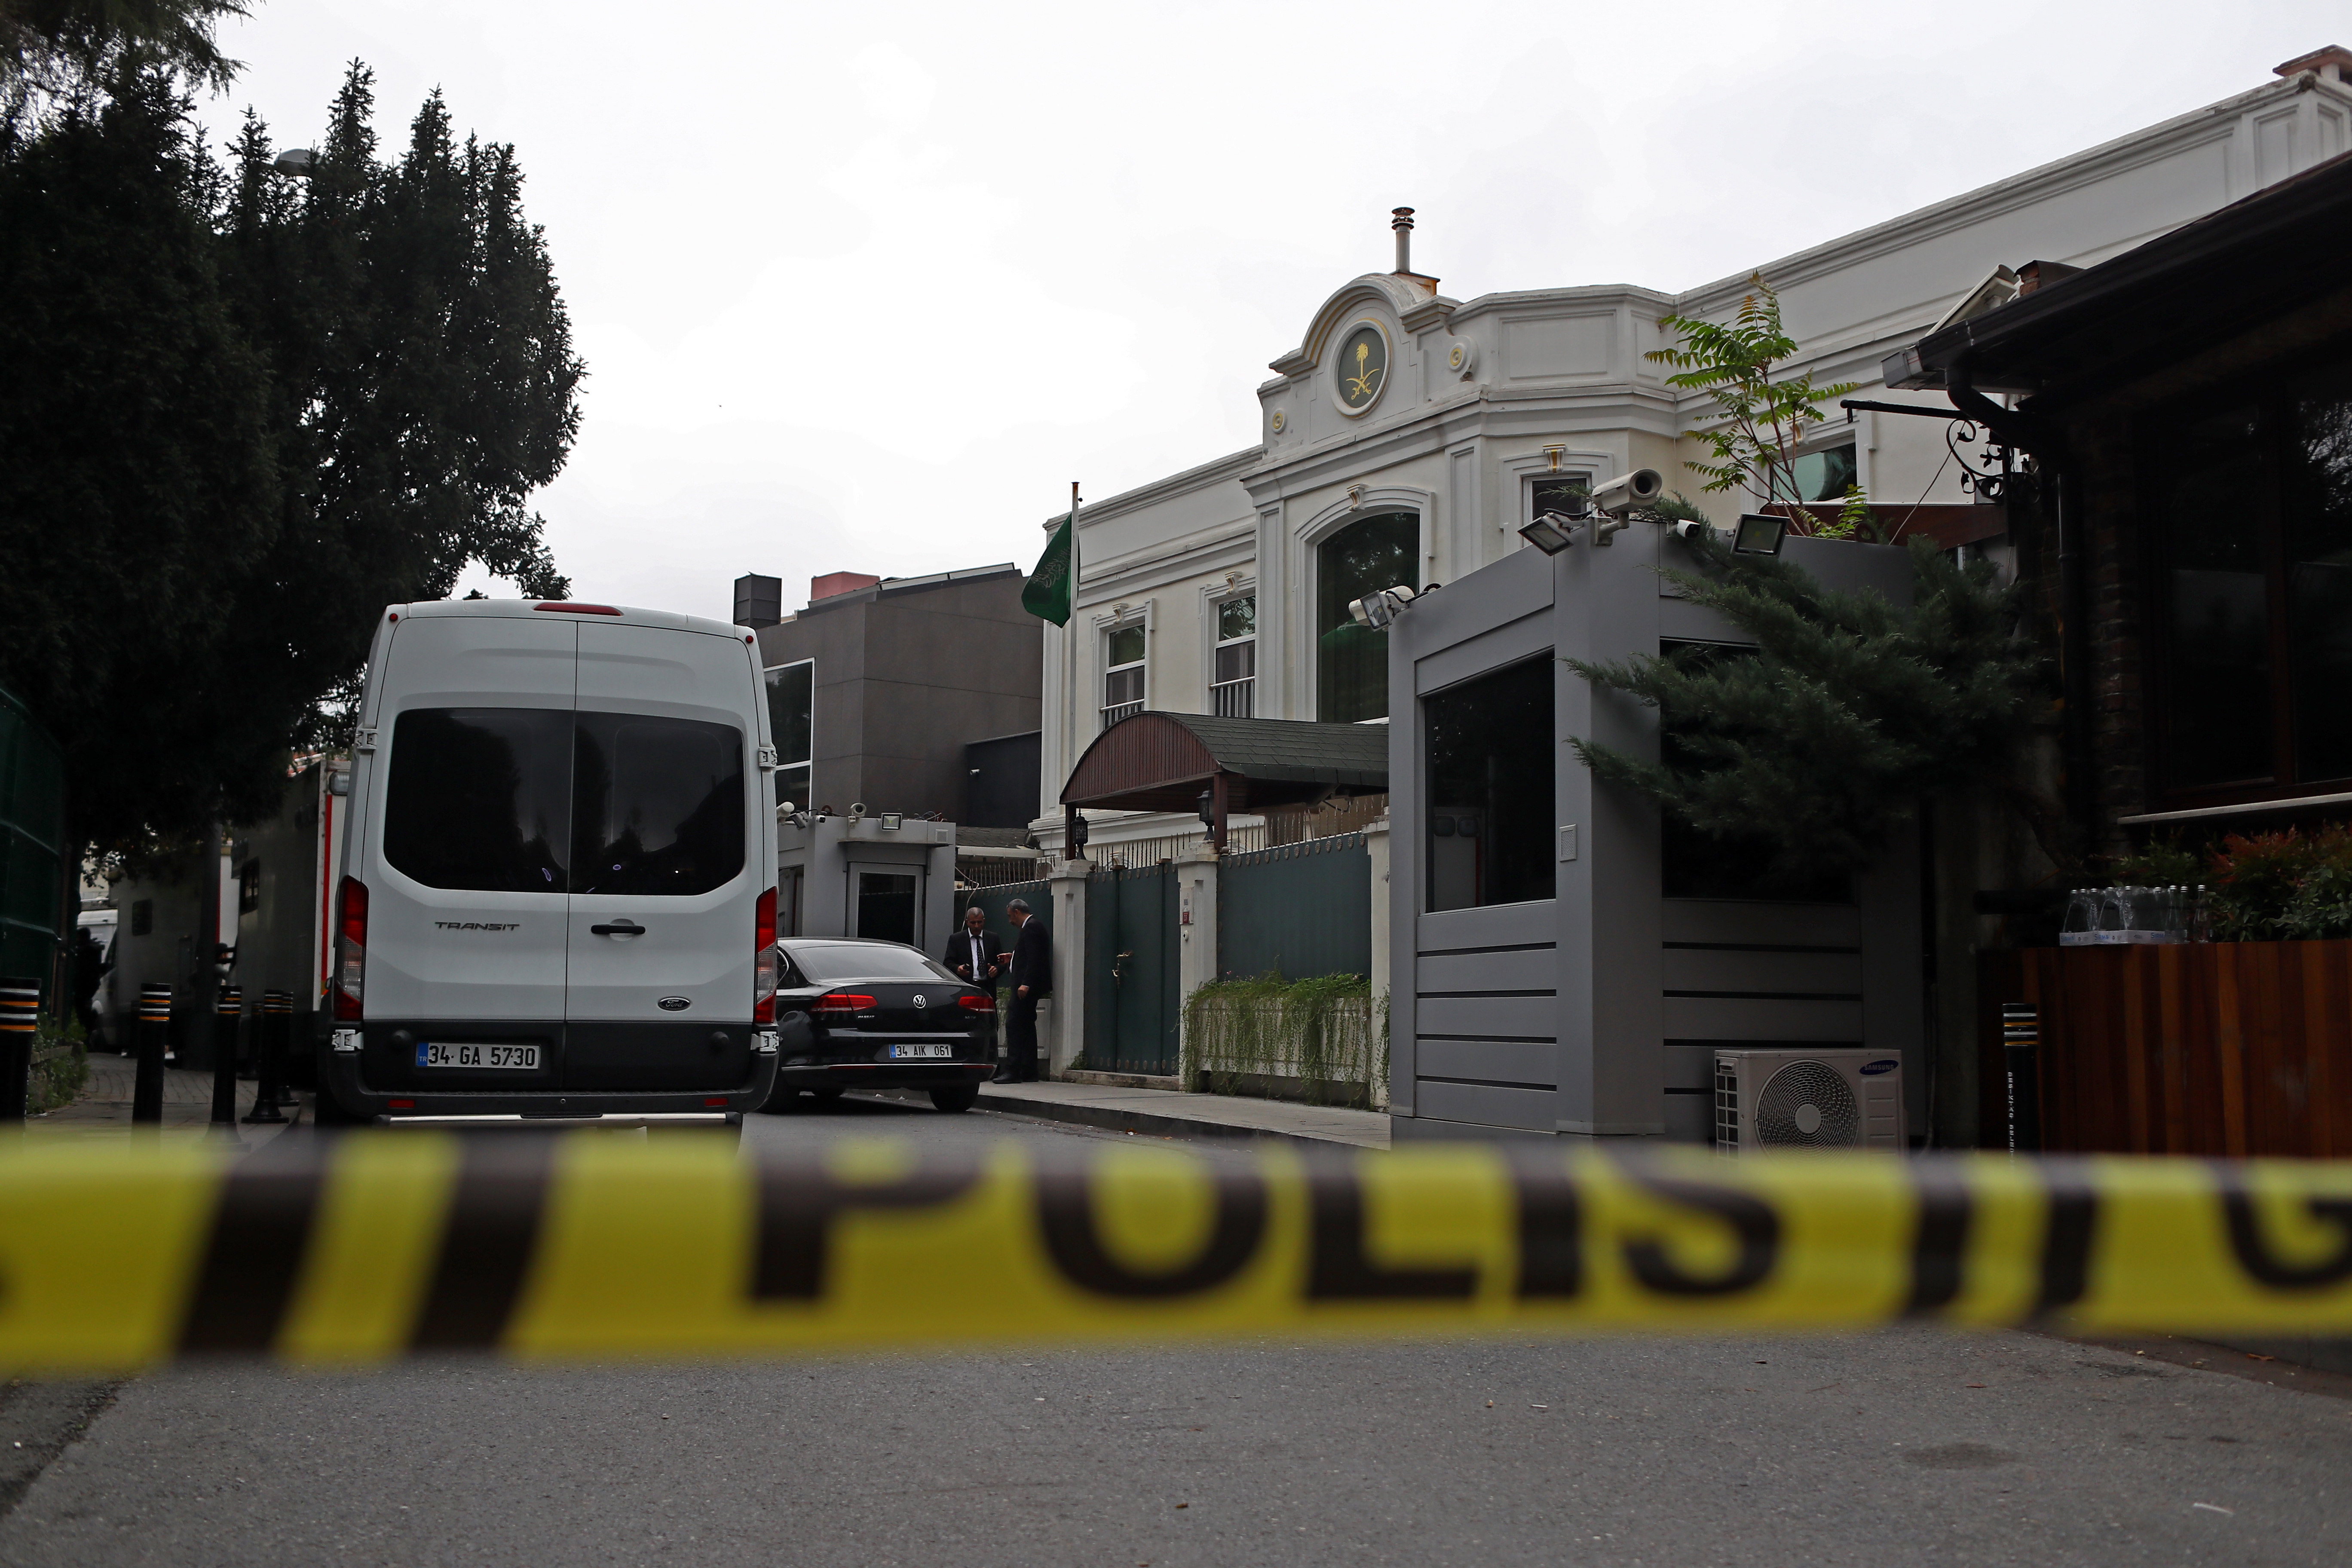 epa07100083 Turkish forensic police officers arrive the residence of the Saudi consul for investigation in Istanbul, Turkey, 17 October 2018. According to local media reports, Saudi consul Mohammad al-Otaibi has left Turkey on 16 October. A Turkish prosecutor on 15 October has entered the Saudi consulate in Istanbul to investigate the disappearance of dissident Saudi journalist Jamal Khashoggi, an inspection that was being carried out jointly with a Saudi team. Khashoggi went missing on 02 October when he entered the Saudi consulate to pick up paperwork.  EPA/SEDAT SUNA